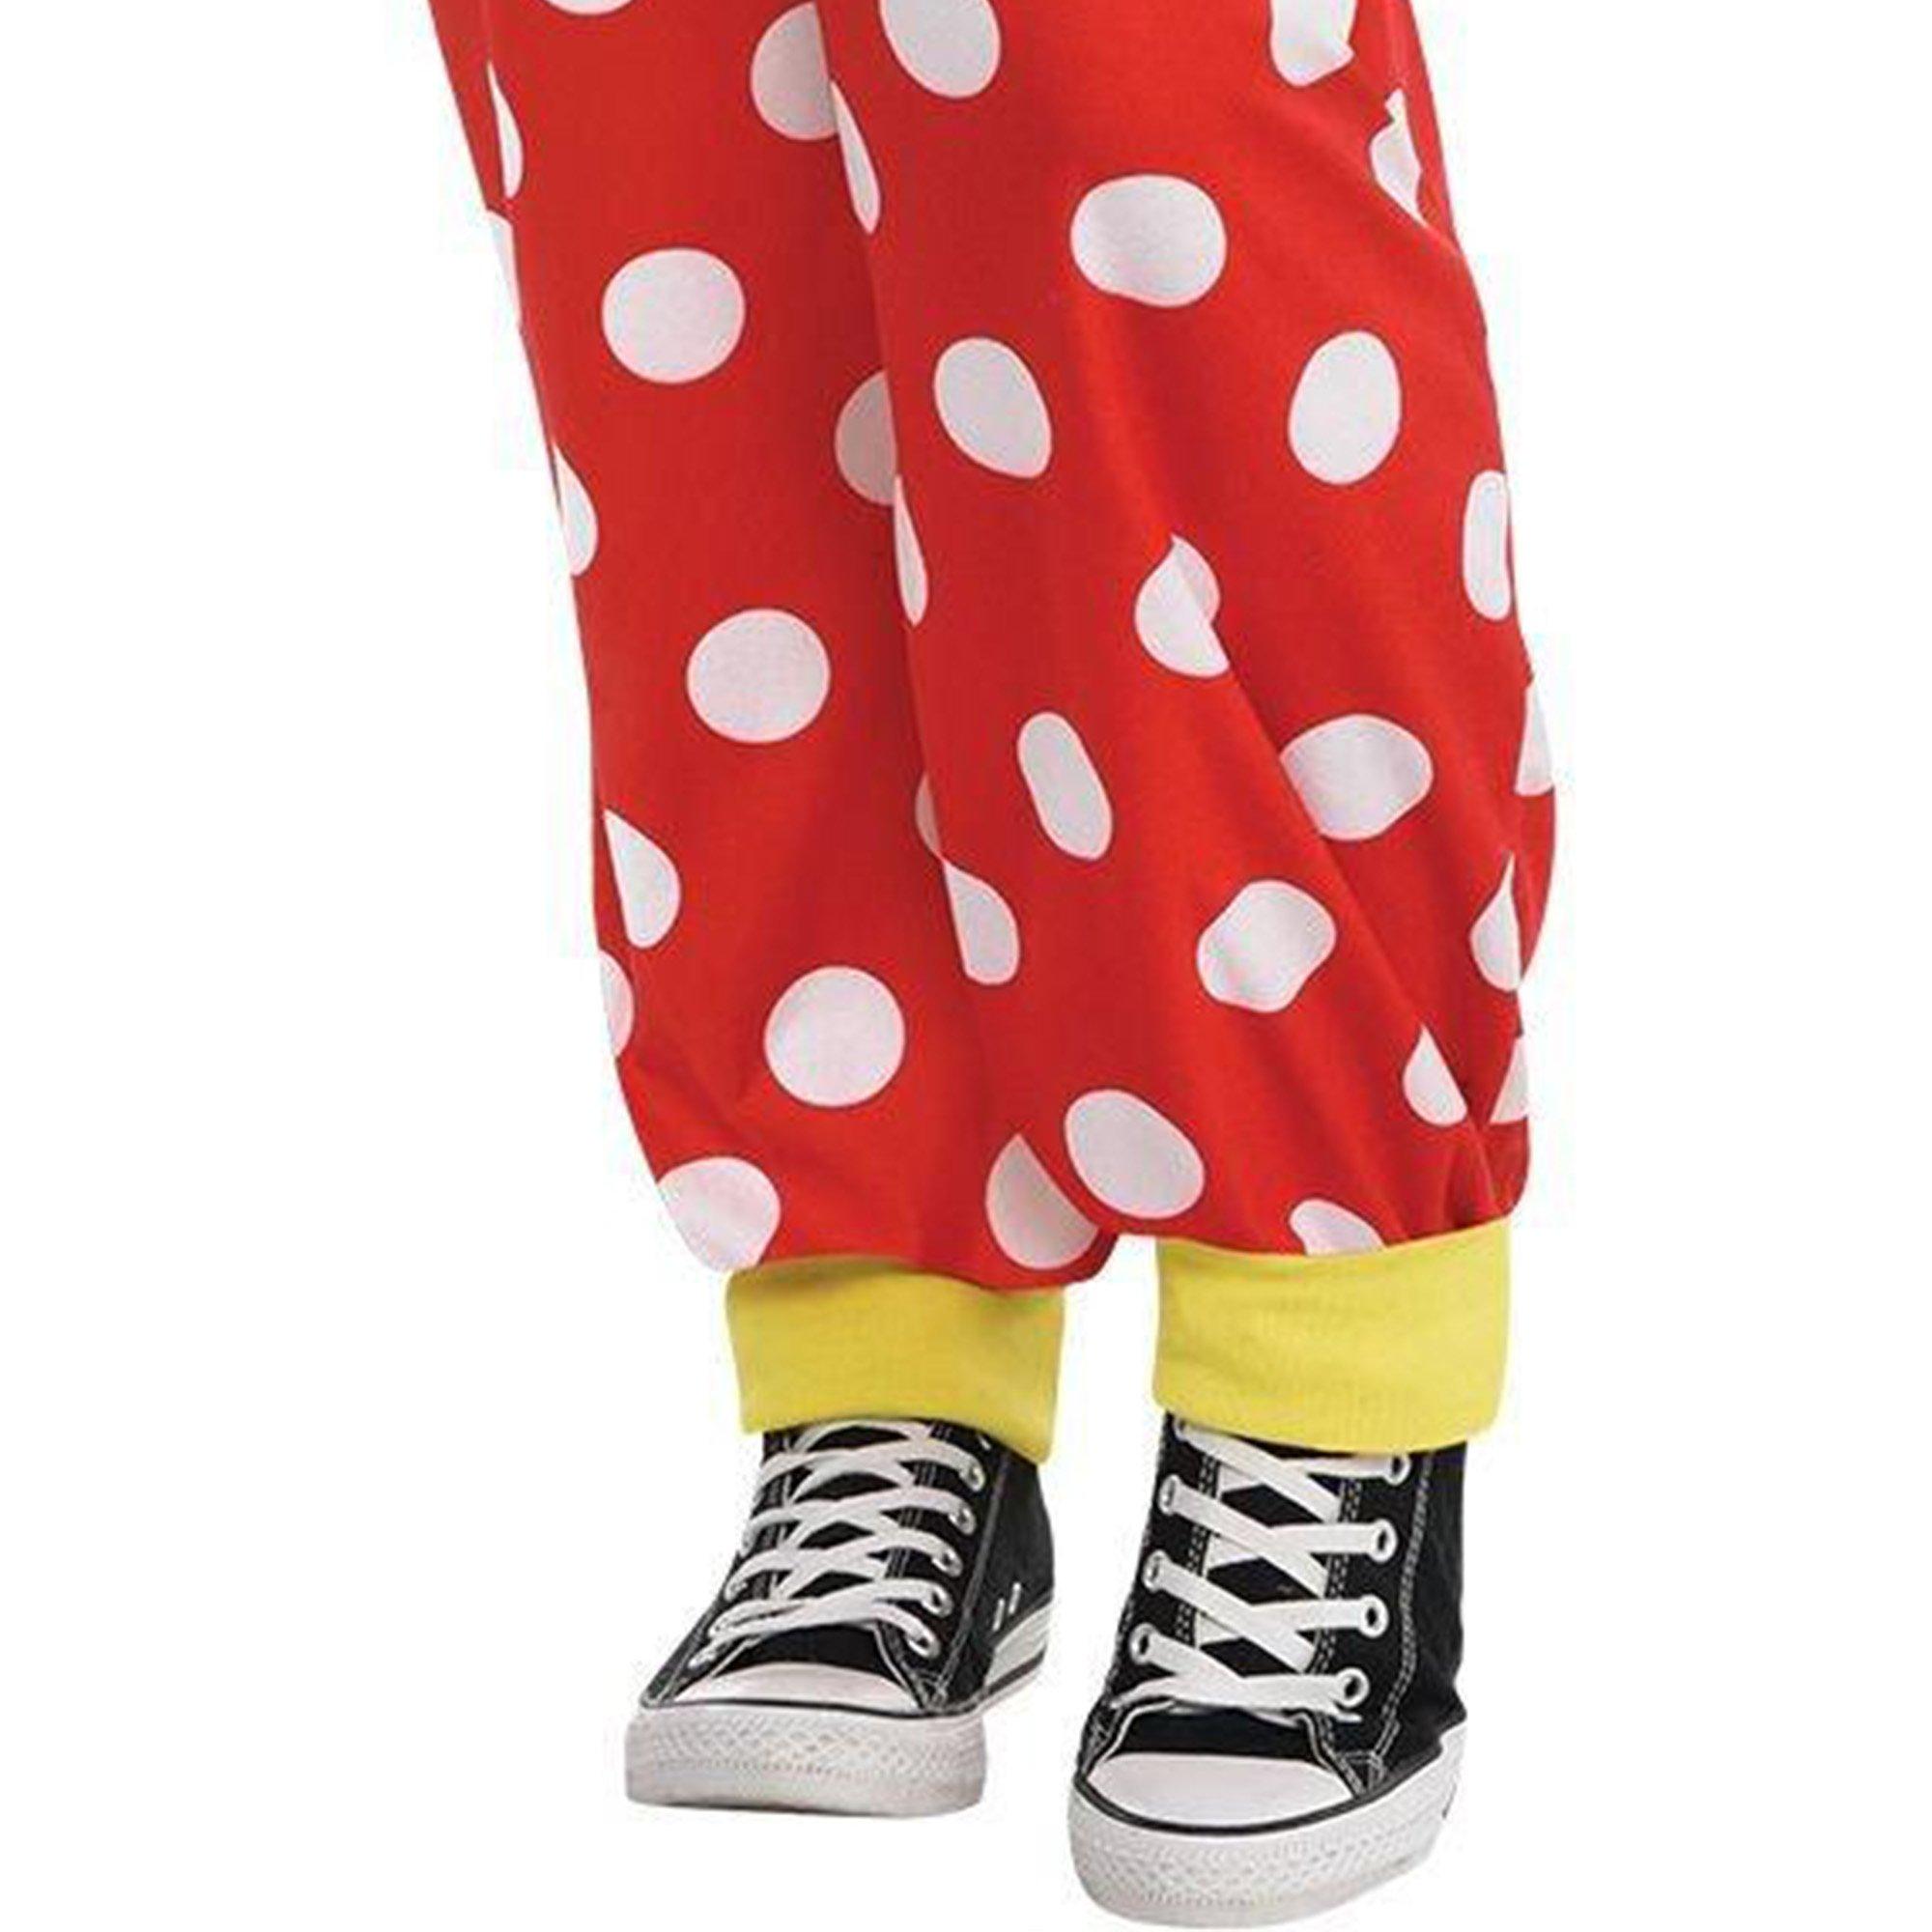 Adult Zipster Red Polka Dot Minnie Mouse One Piece Costume Plus Size - Disney